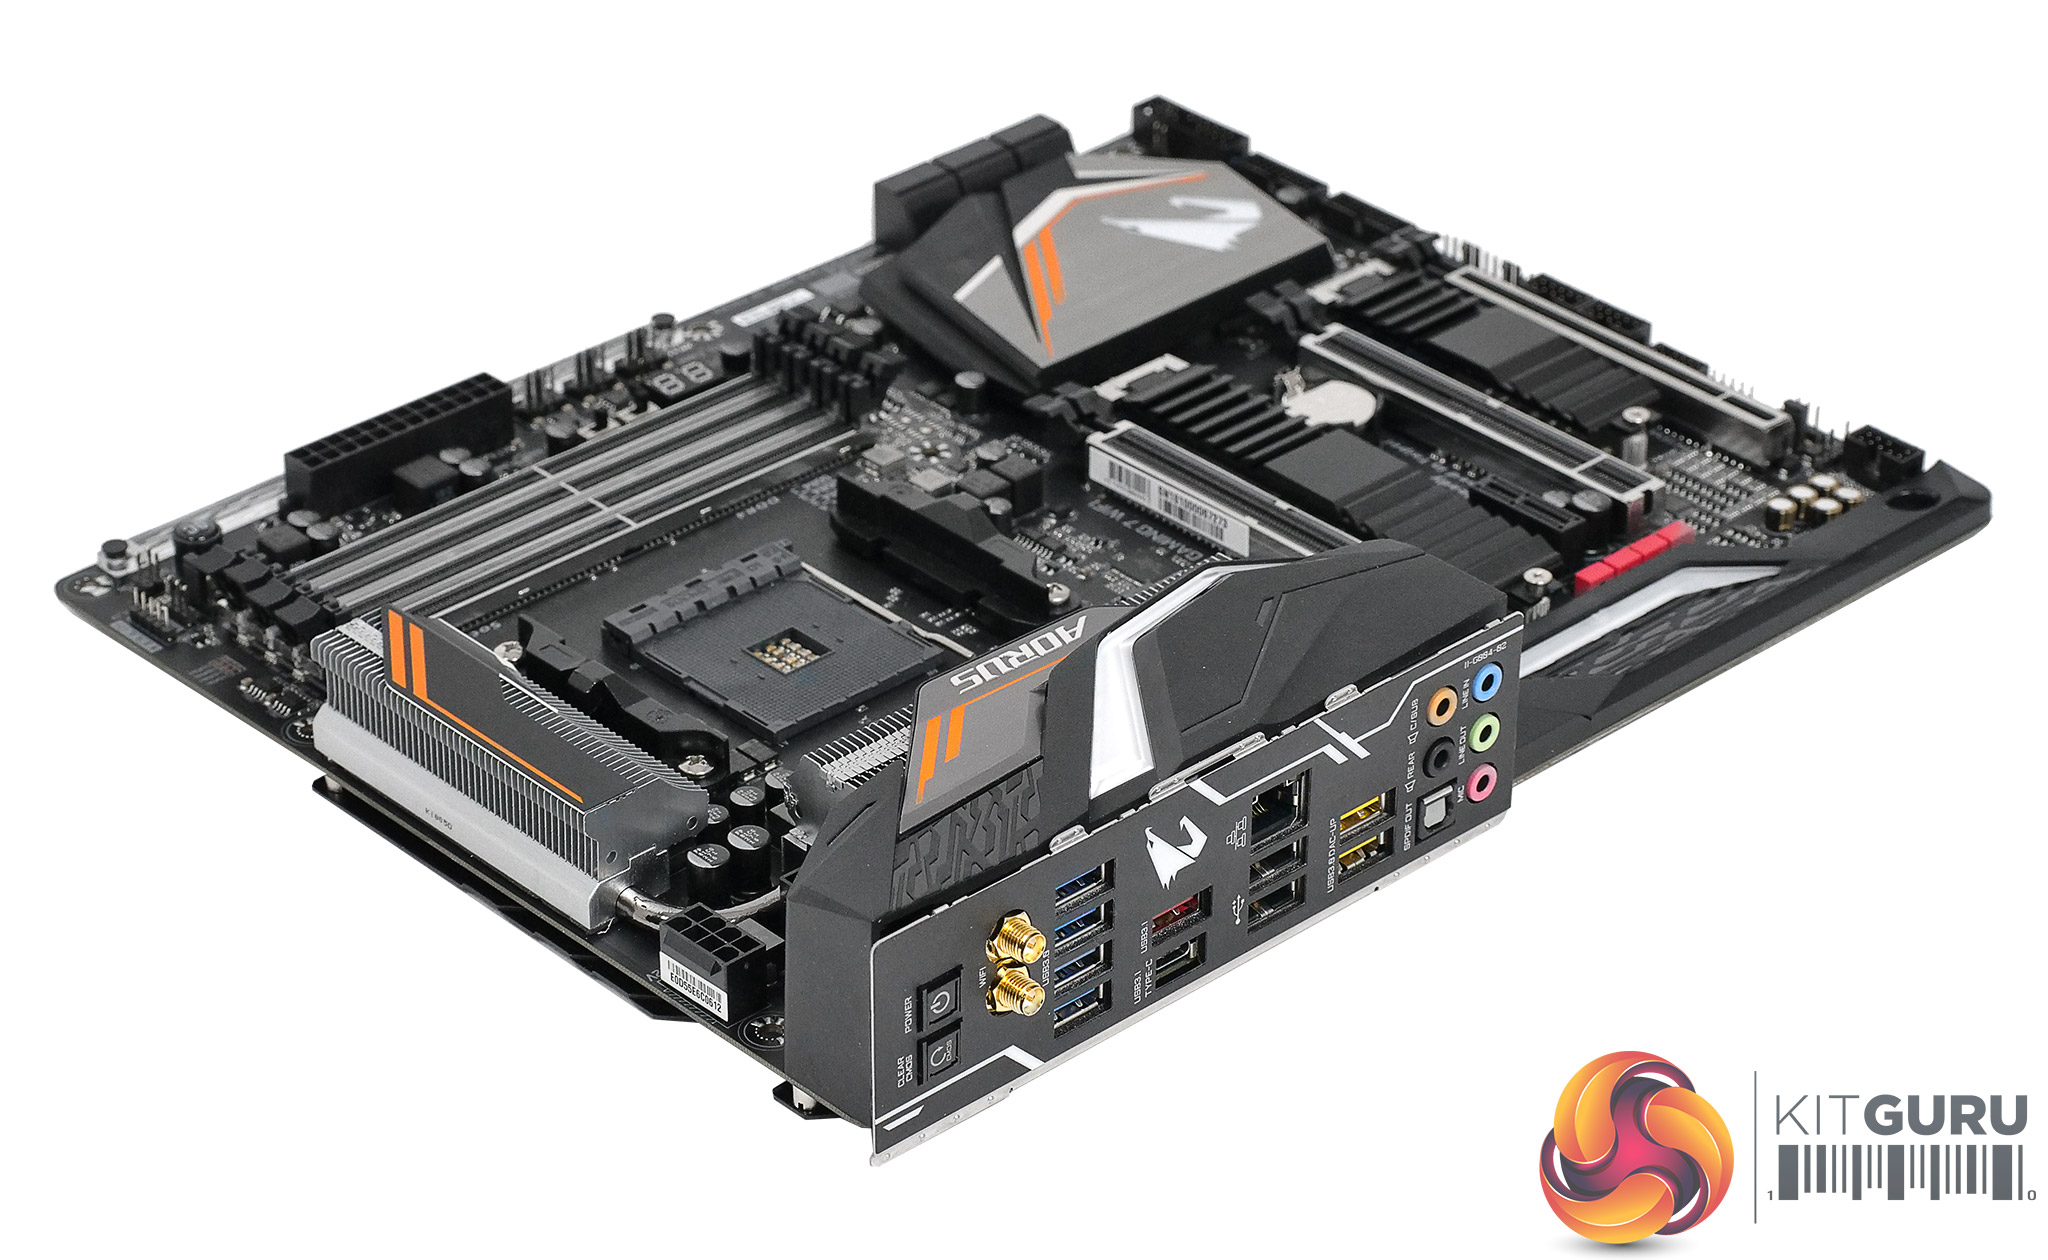 BIOS And Software - The GIGABYTE X470 Gaming 7 Wi-Fi Motherboard Review:  The AM4 Aorus Flagship